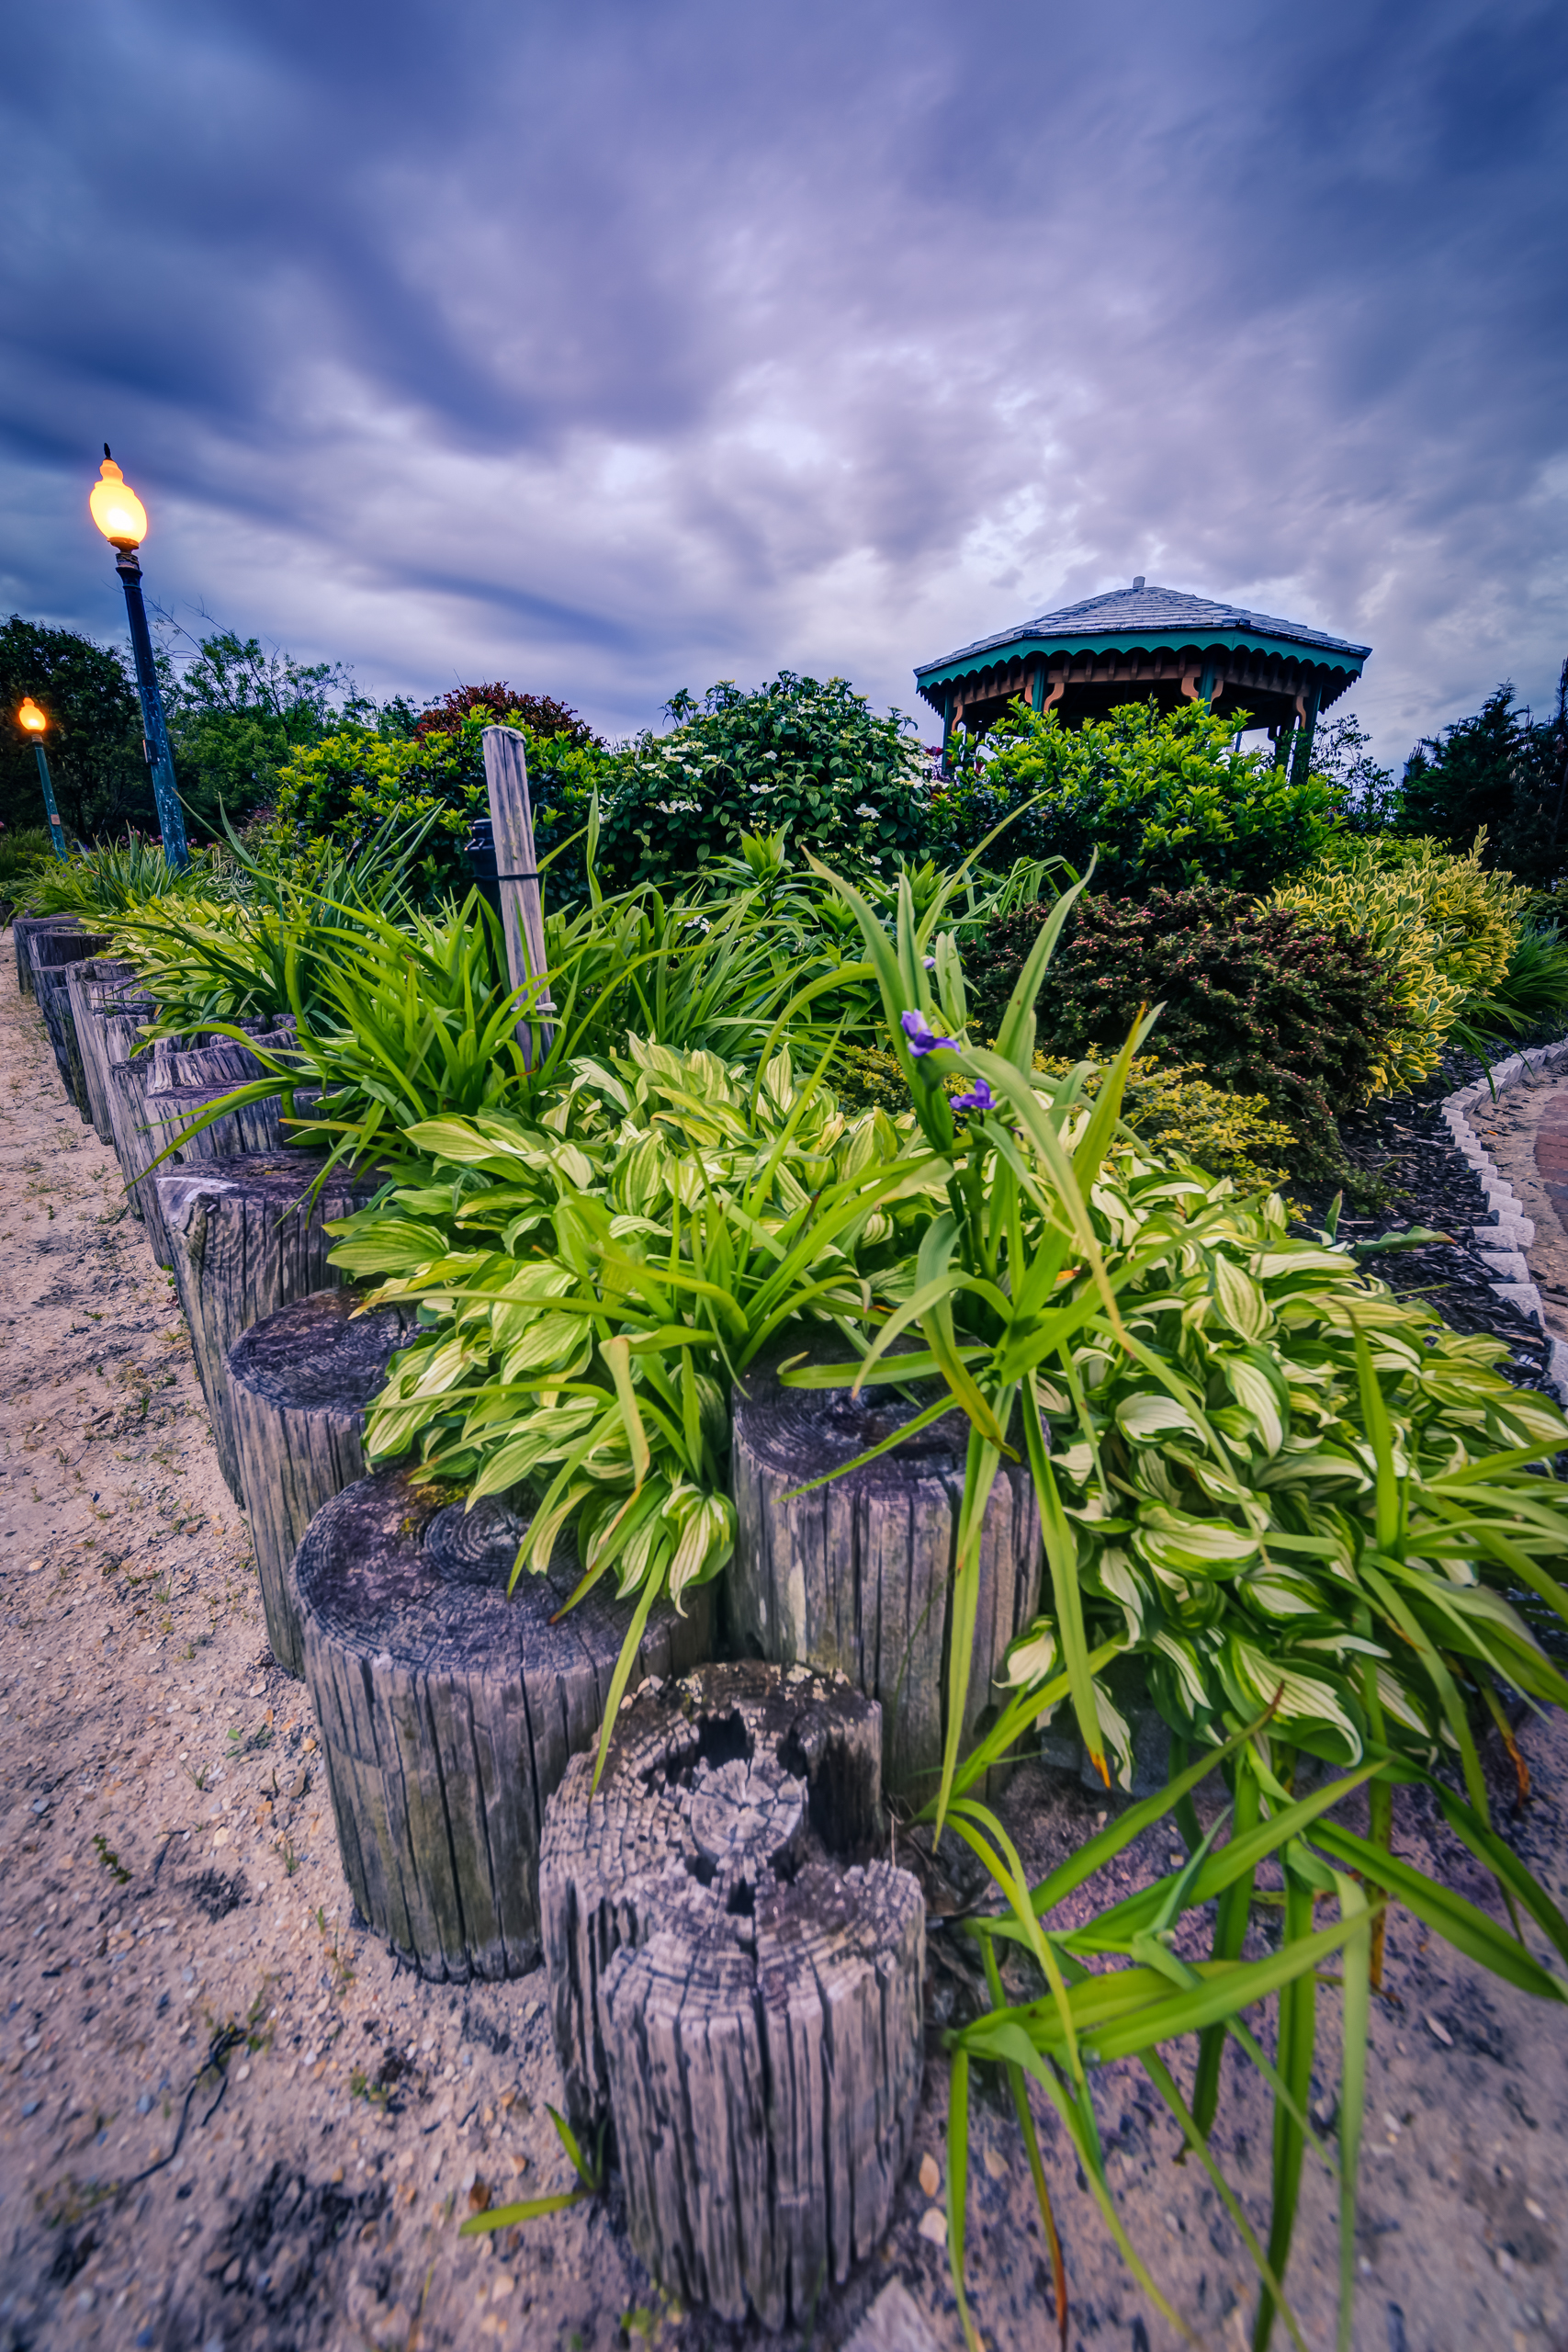 Vertical orientation wide angle photograph of well manicured plant life and gazebo at blur hour